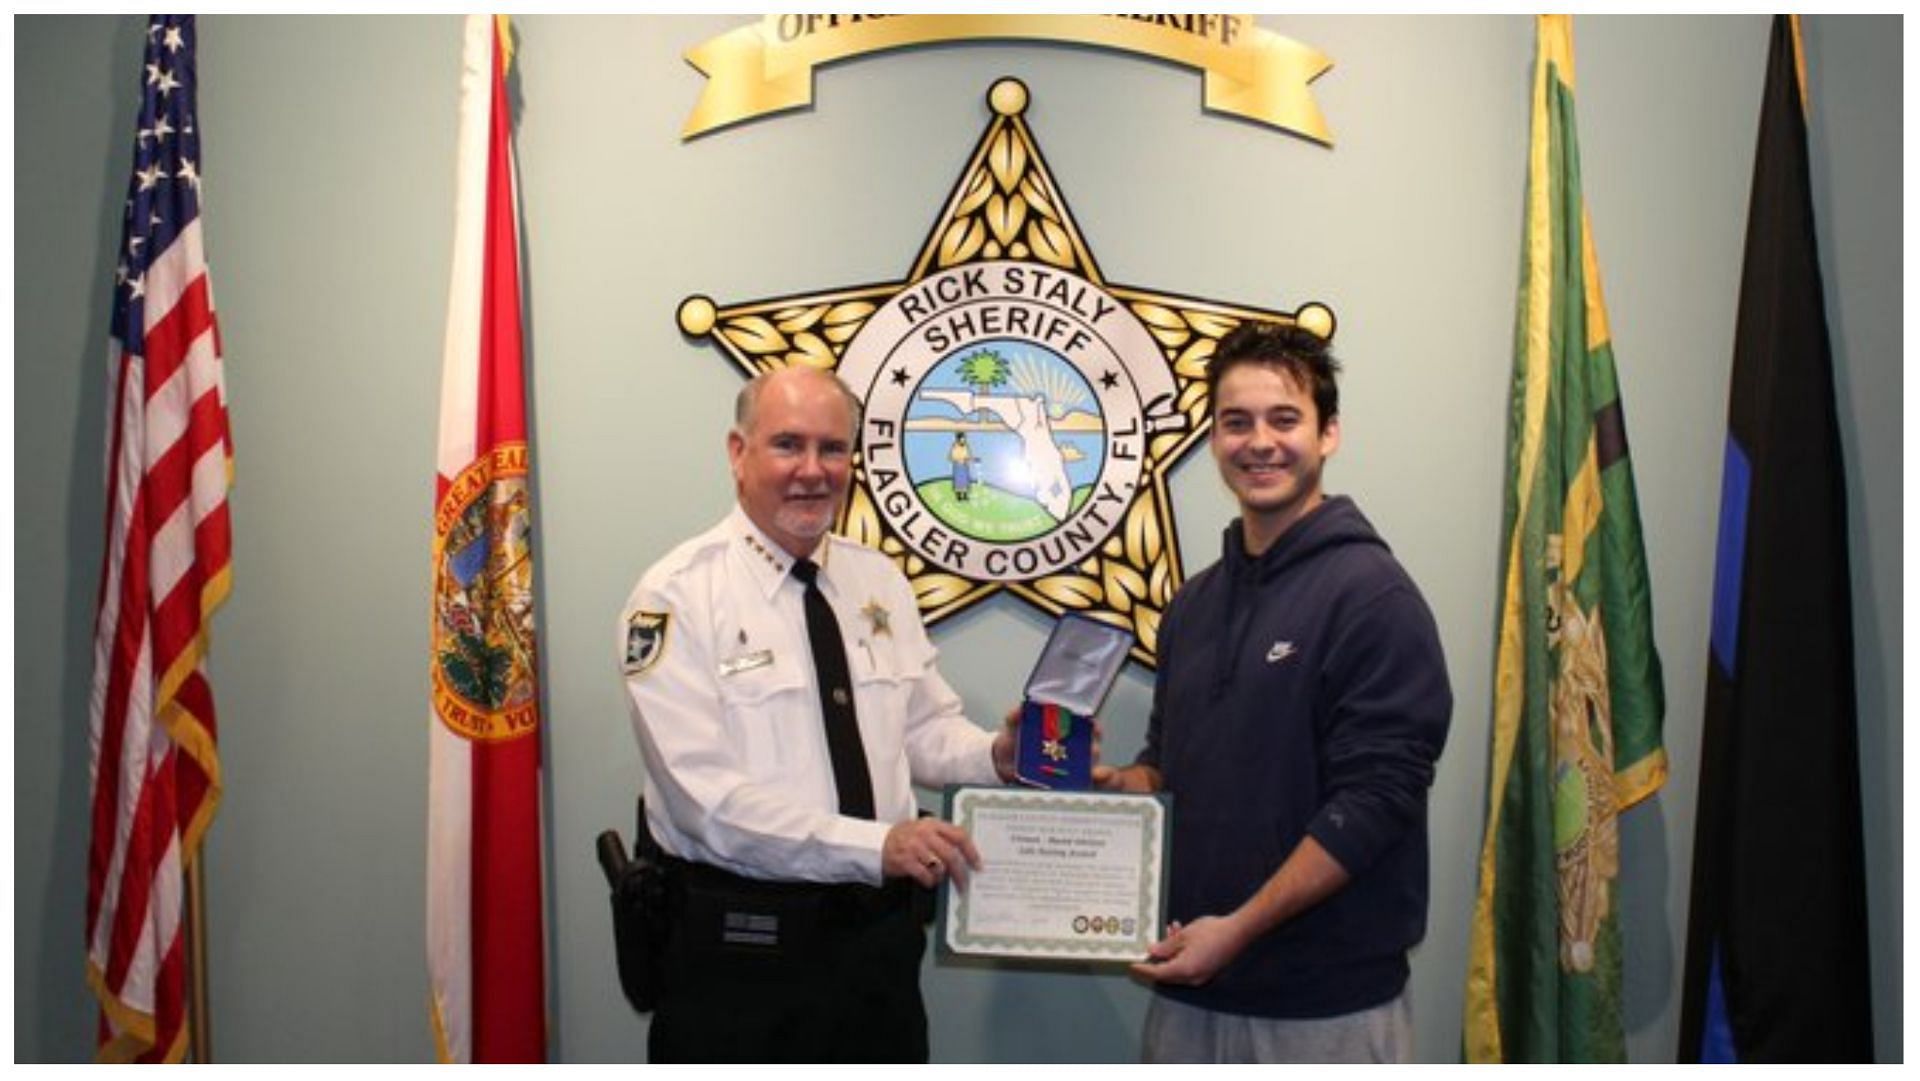 David is awarded a &quot;Lifesaving Award&quot; for saving a woman during gunfire, (Image via @FlaglerSheriff/Twitter)